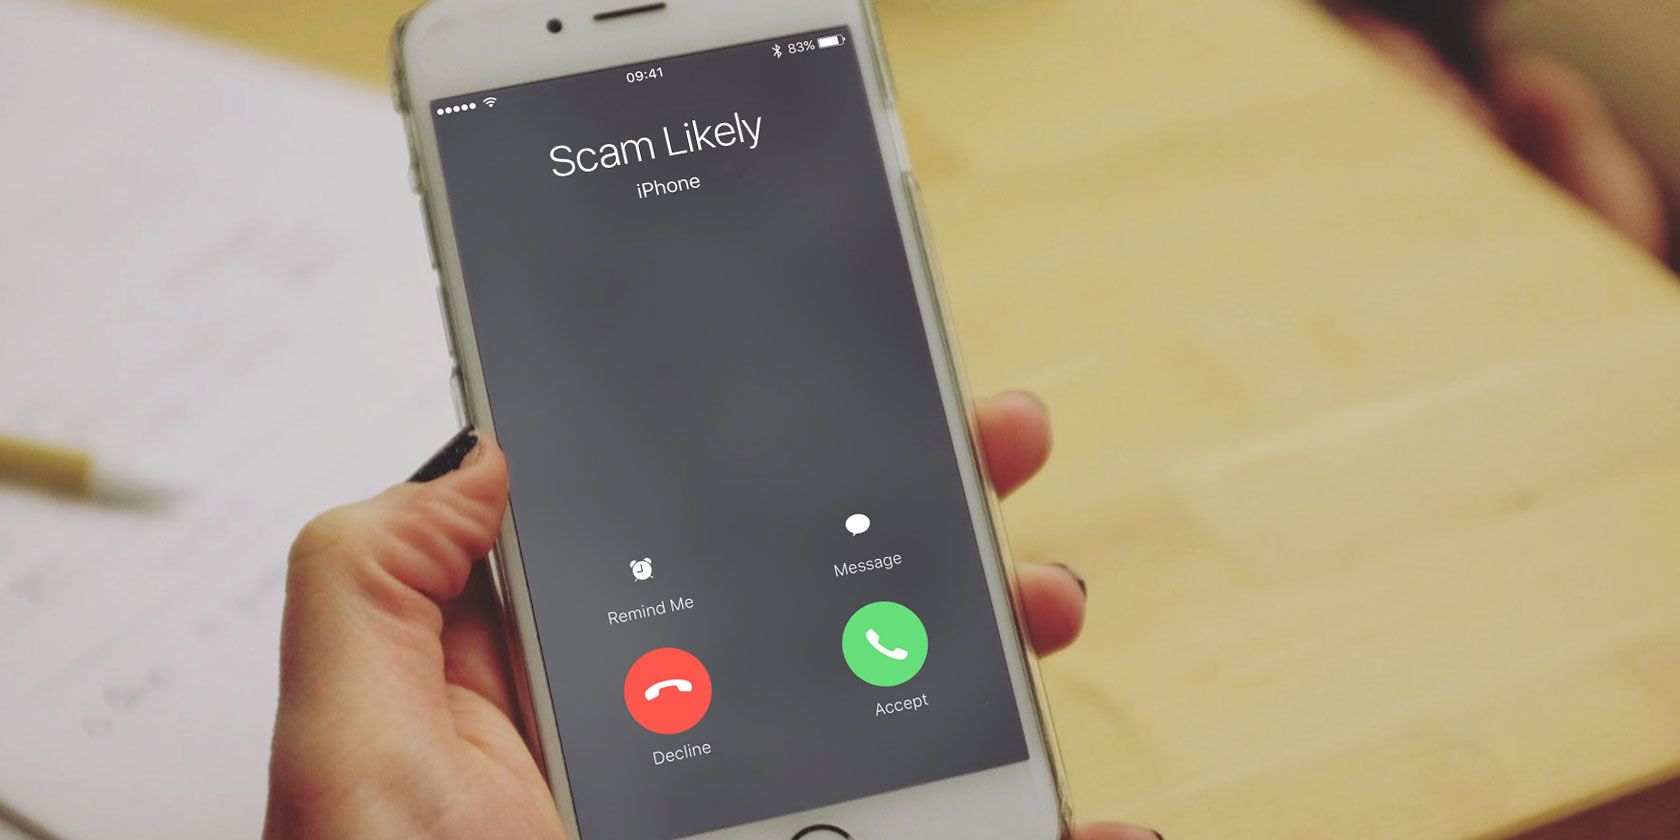 Is “Scam Likely” Calling You? Here’s How to Stop Them.